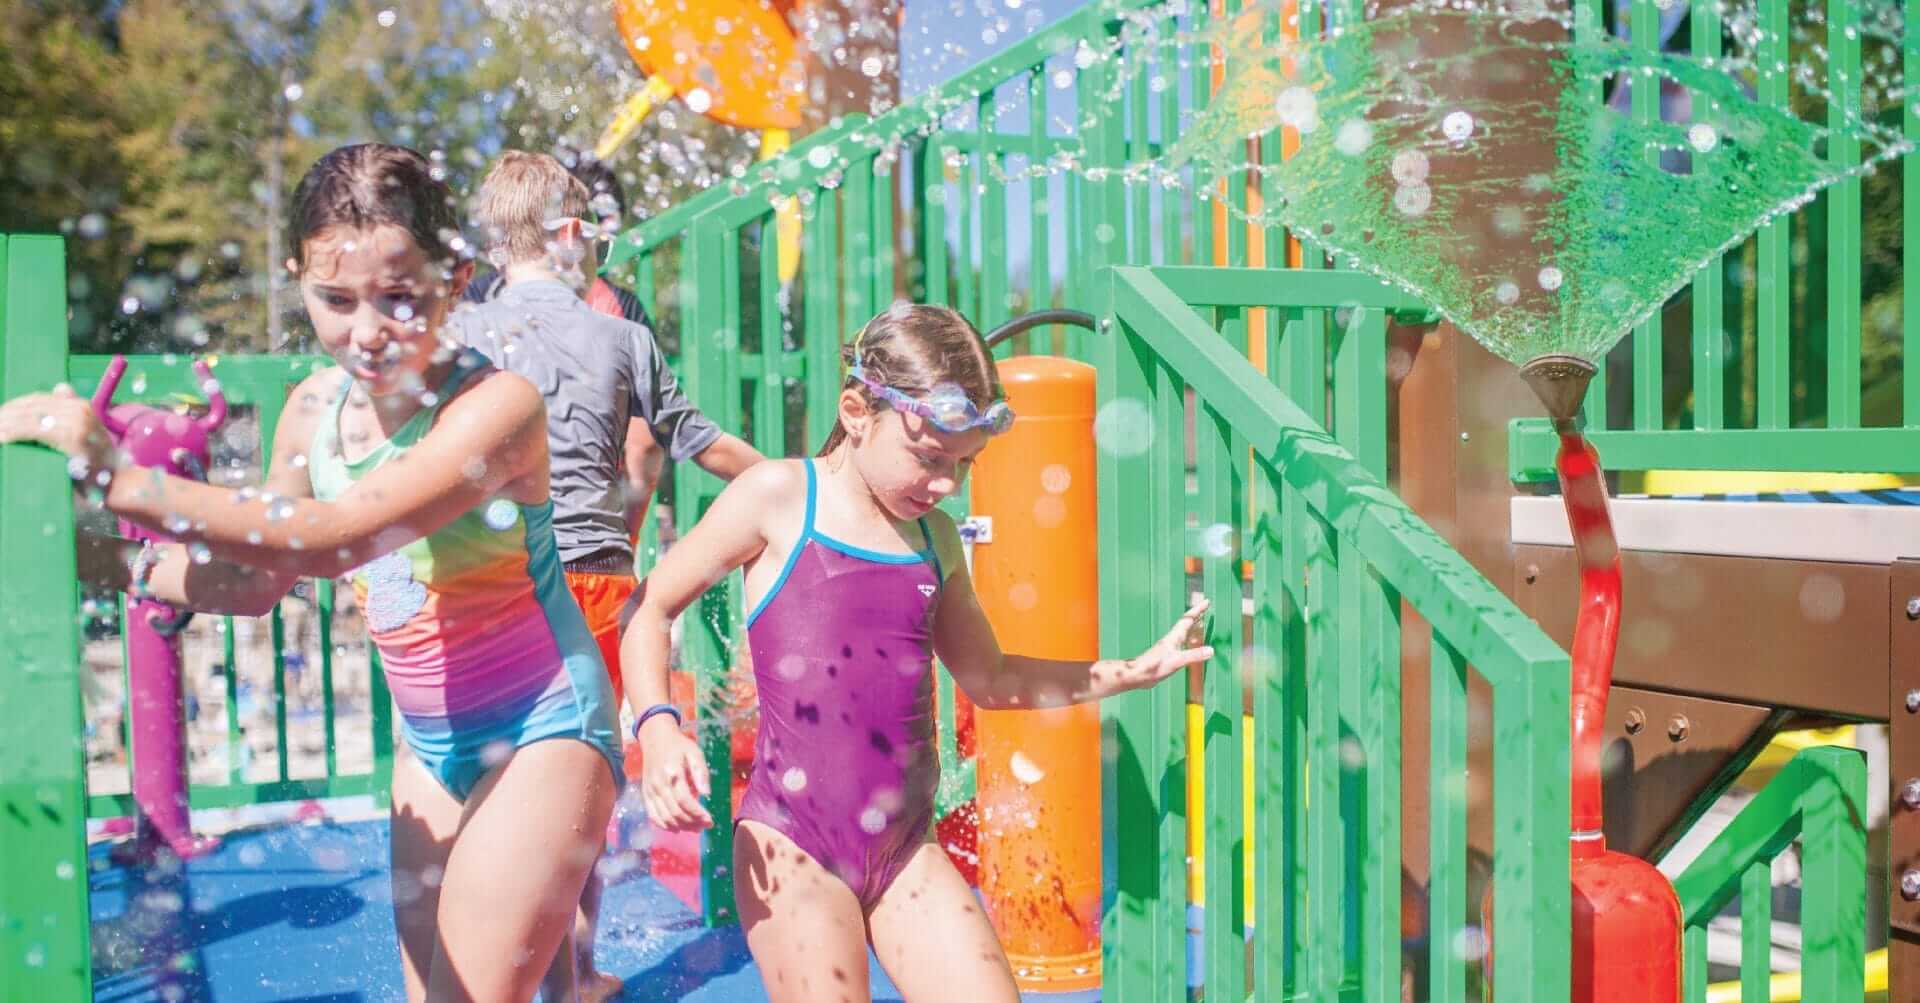 A little girl exits the aquatic play unit and is sprayed with a cascading water spray by the fanatic water feature next to her.